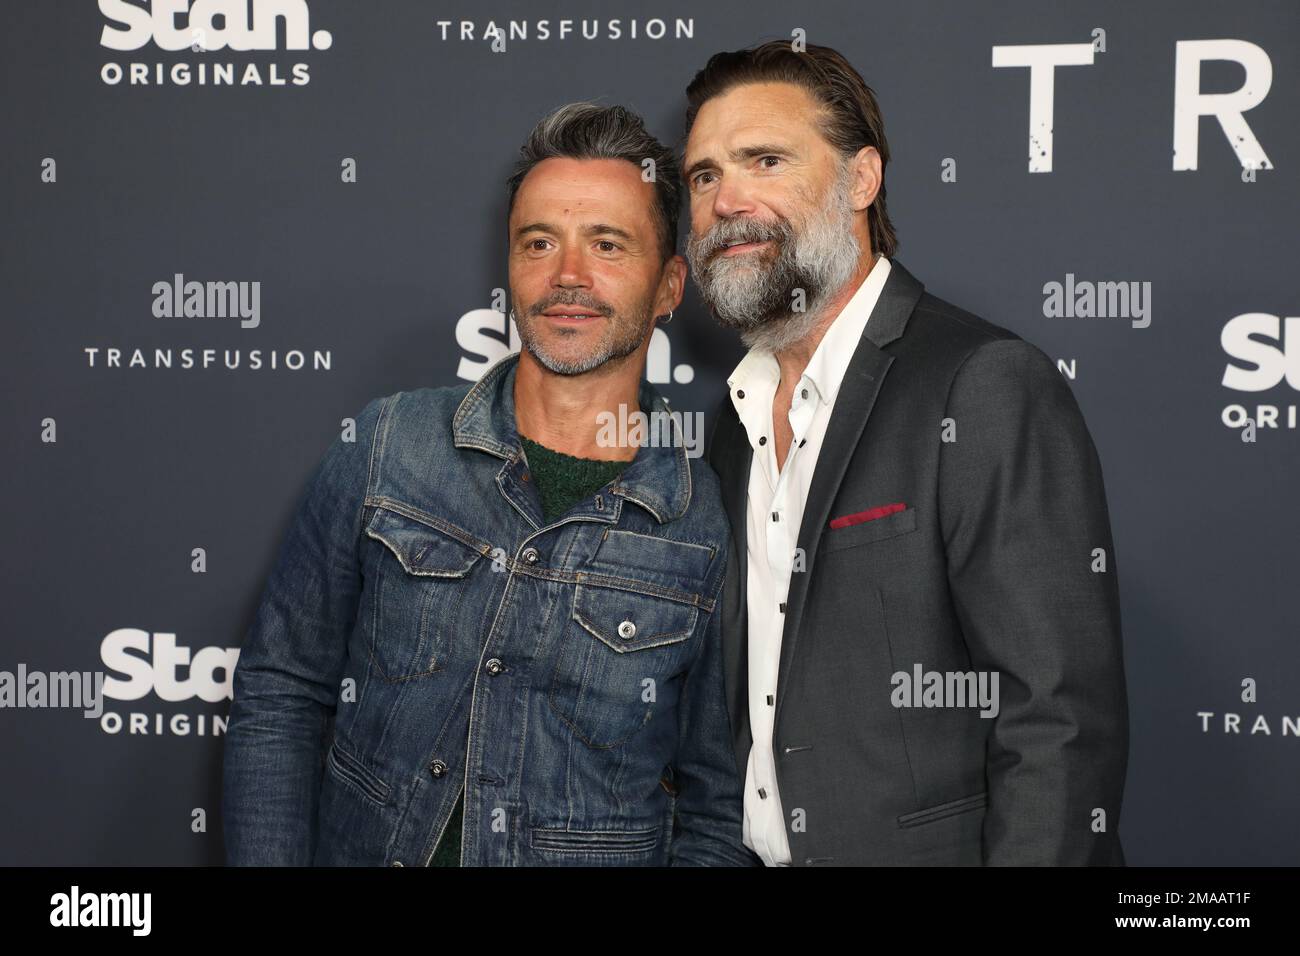 Sydney, Australia. 19th January 2023. Damian Walshe-Howling and Jeremy Lindsay Taylor arrive on the red carpet for the Sydney premier of TRANSFUSION at Hoyts Entertainment Quarter. Credit: Richard Milnes/Alamy Live News Stock Photo